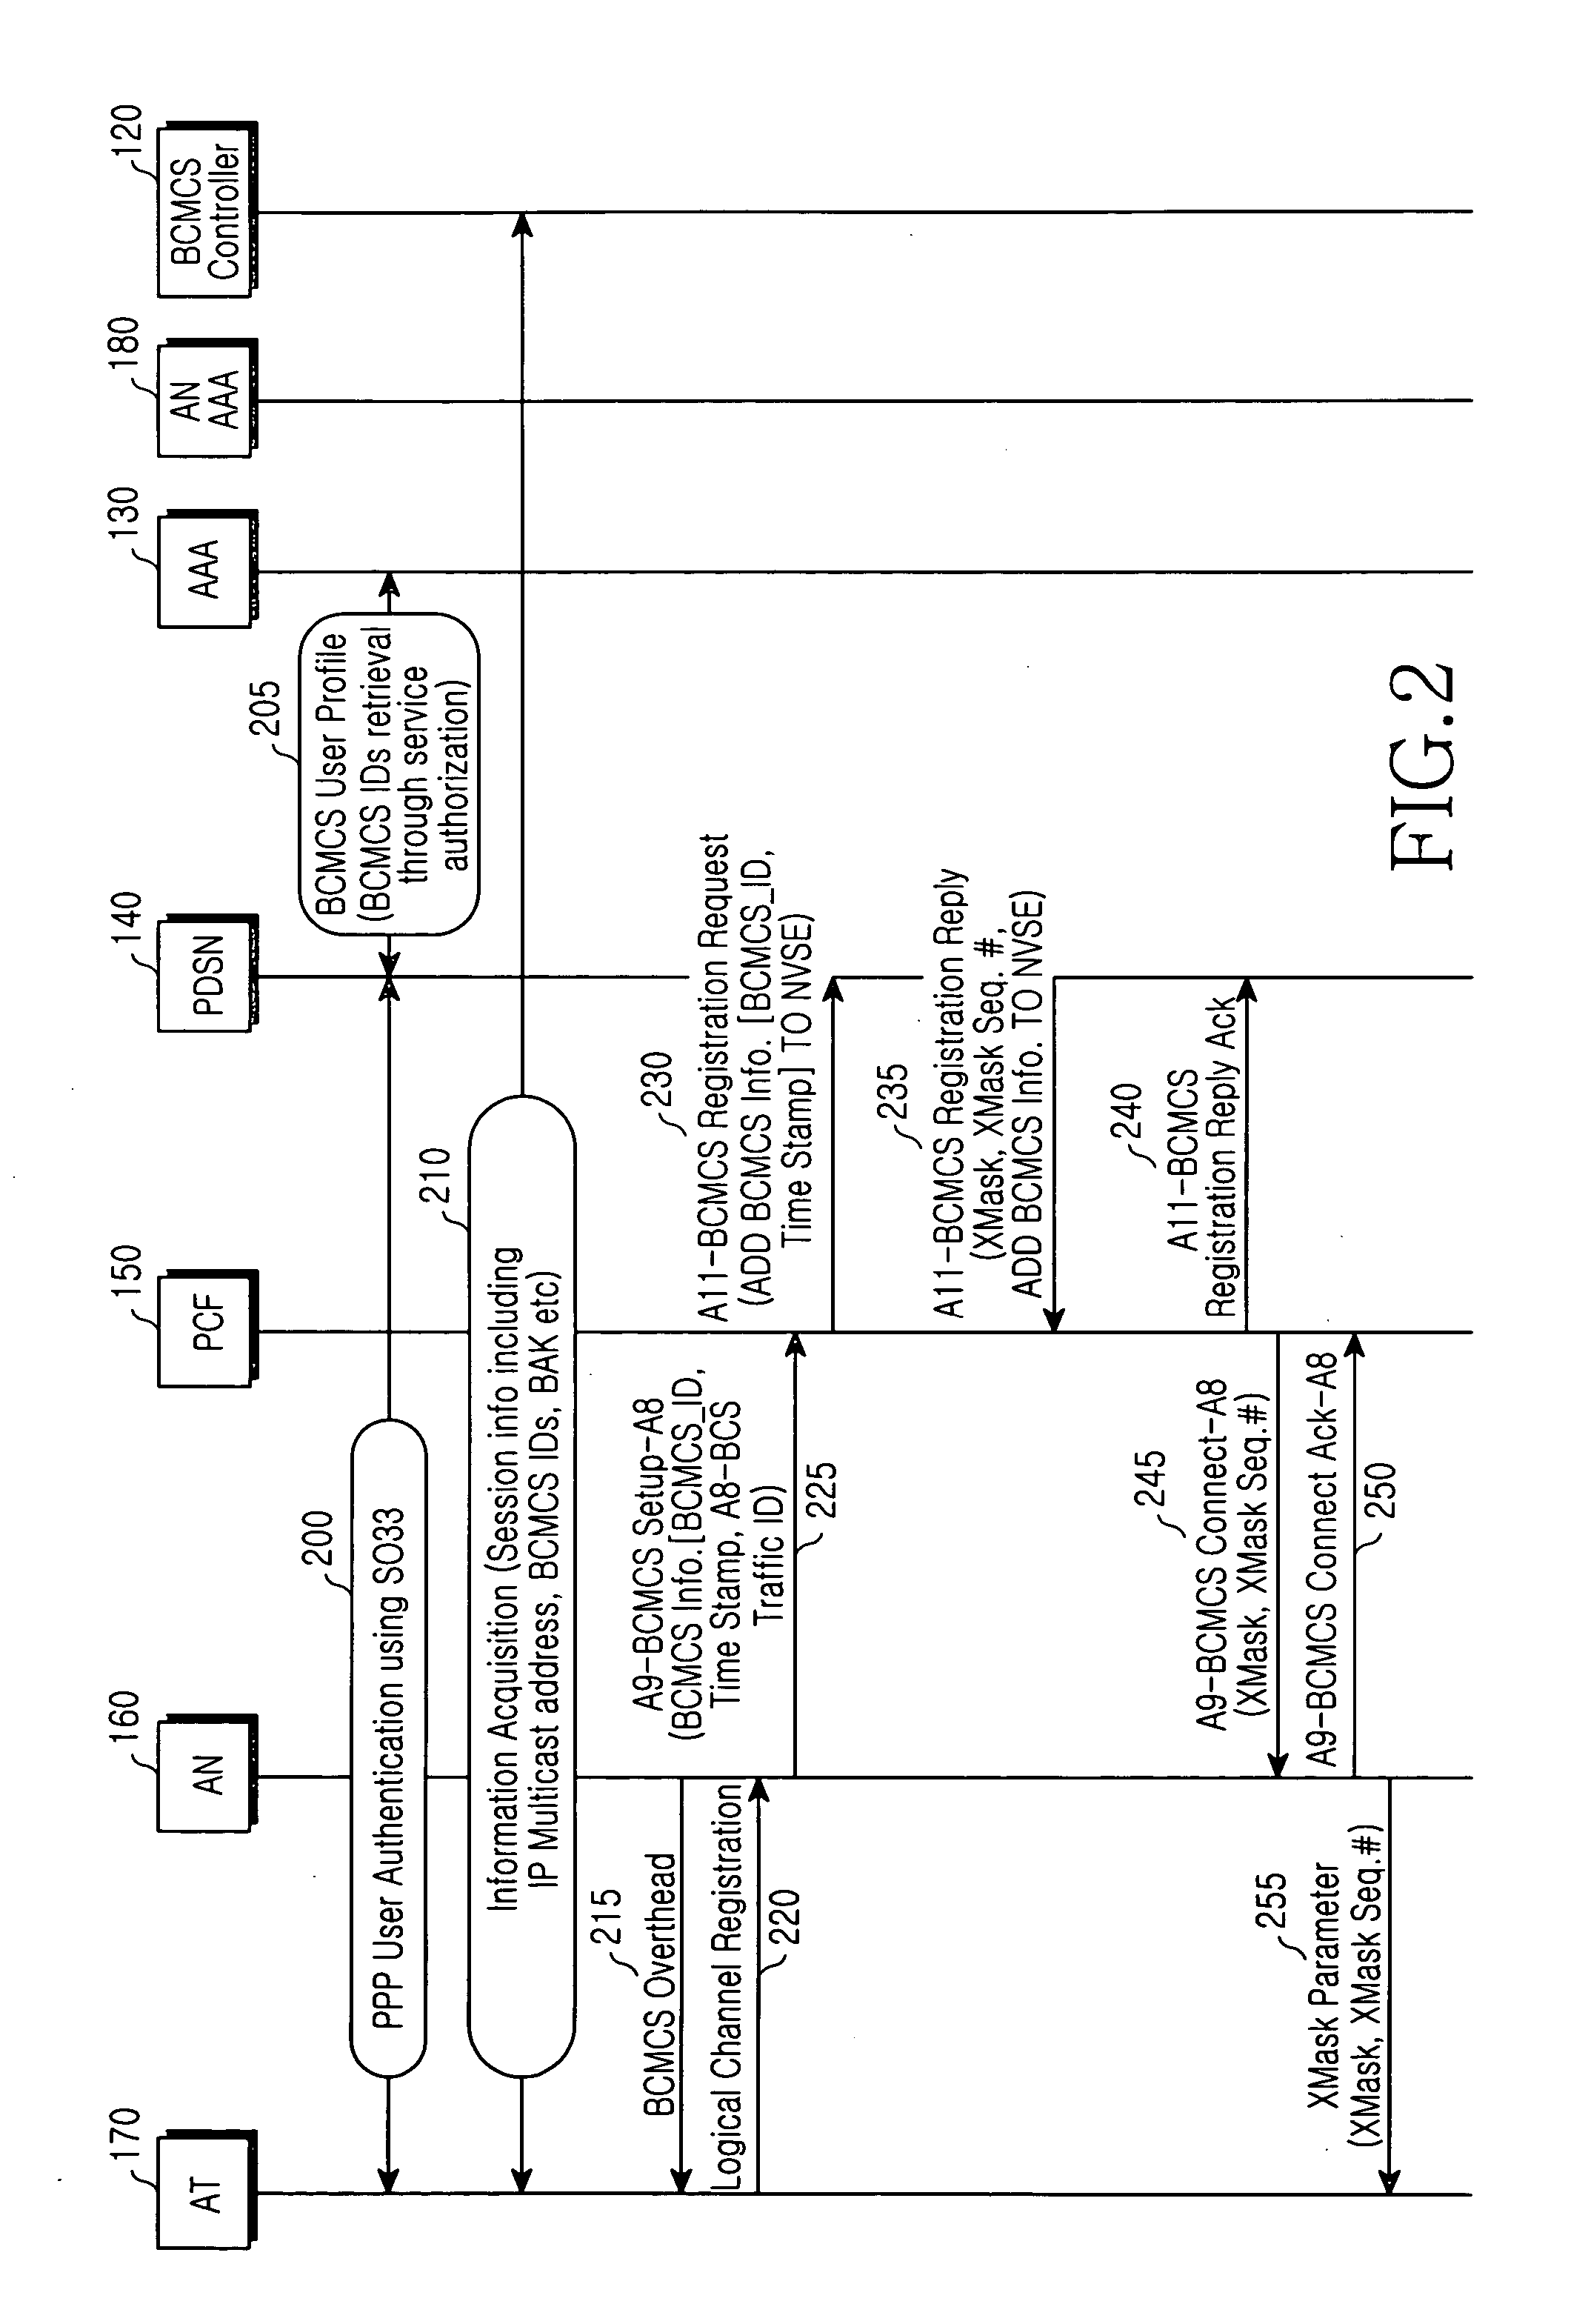 Method for registering broadcast/multicast service in a high-rate packet data system